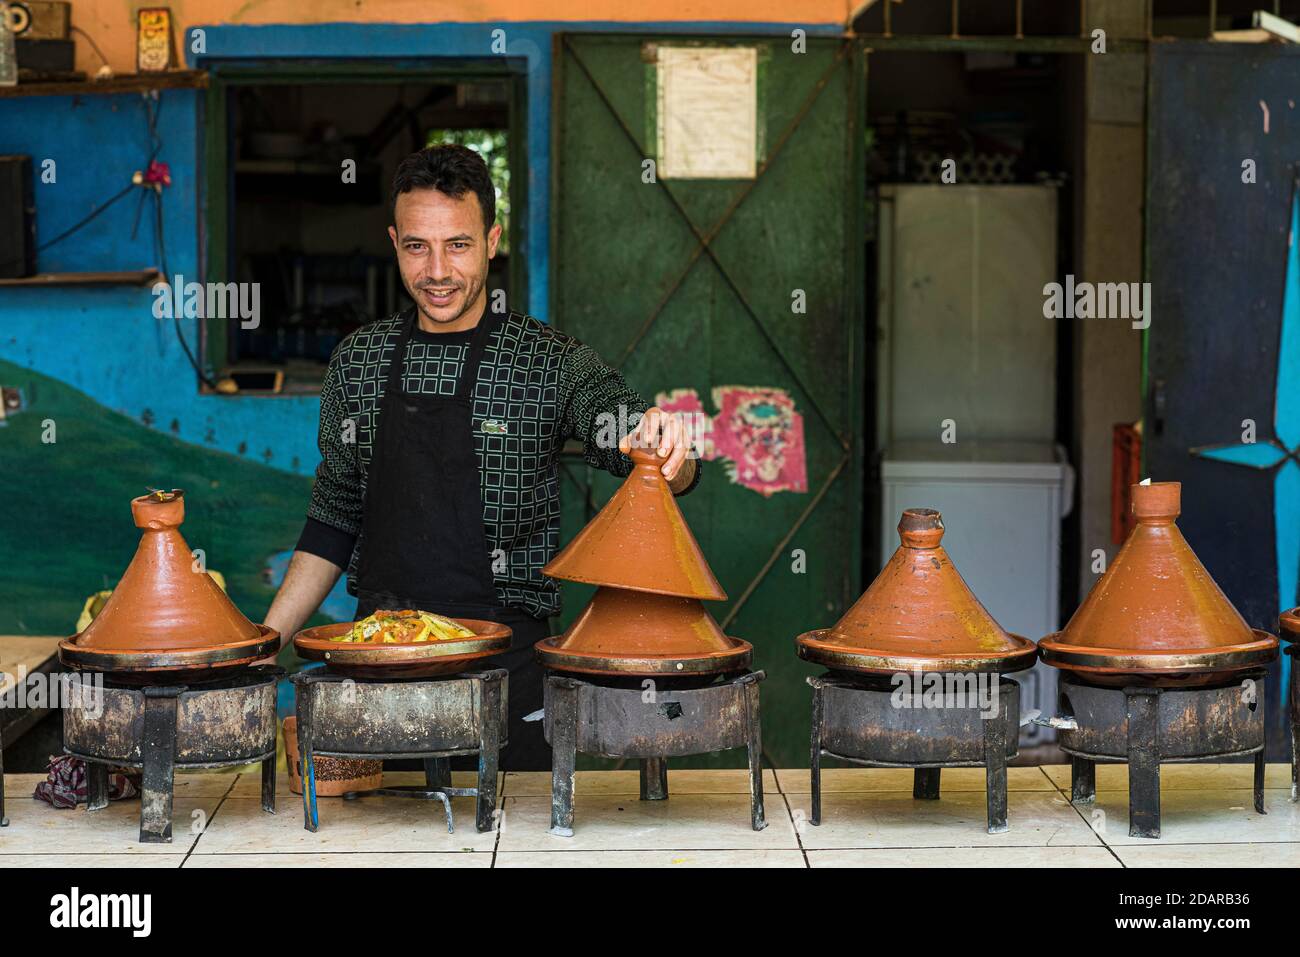 Tajine, a man offers traditional Moroccan food prepared on charcoal fire in typical Tajine pots at a stand Stock Photo